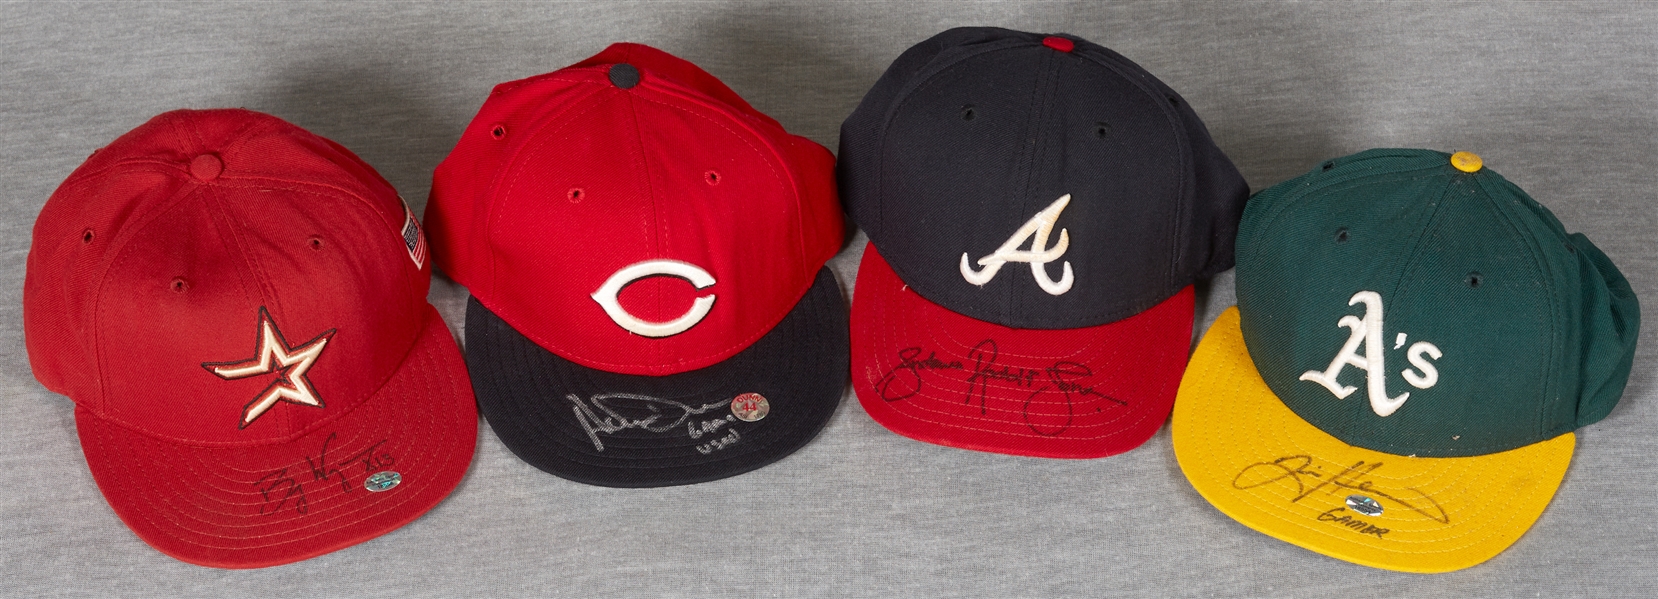 Signed & Game-Used Caps Group with Dunn, Andruw Jones, Billy Wagner, Tim Hudson (4)